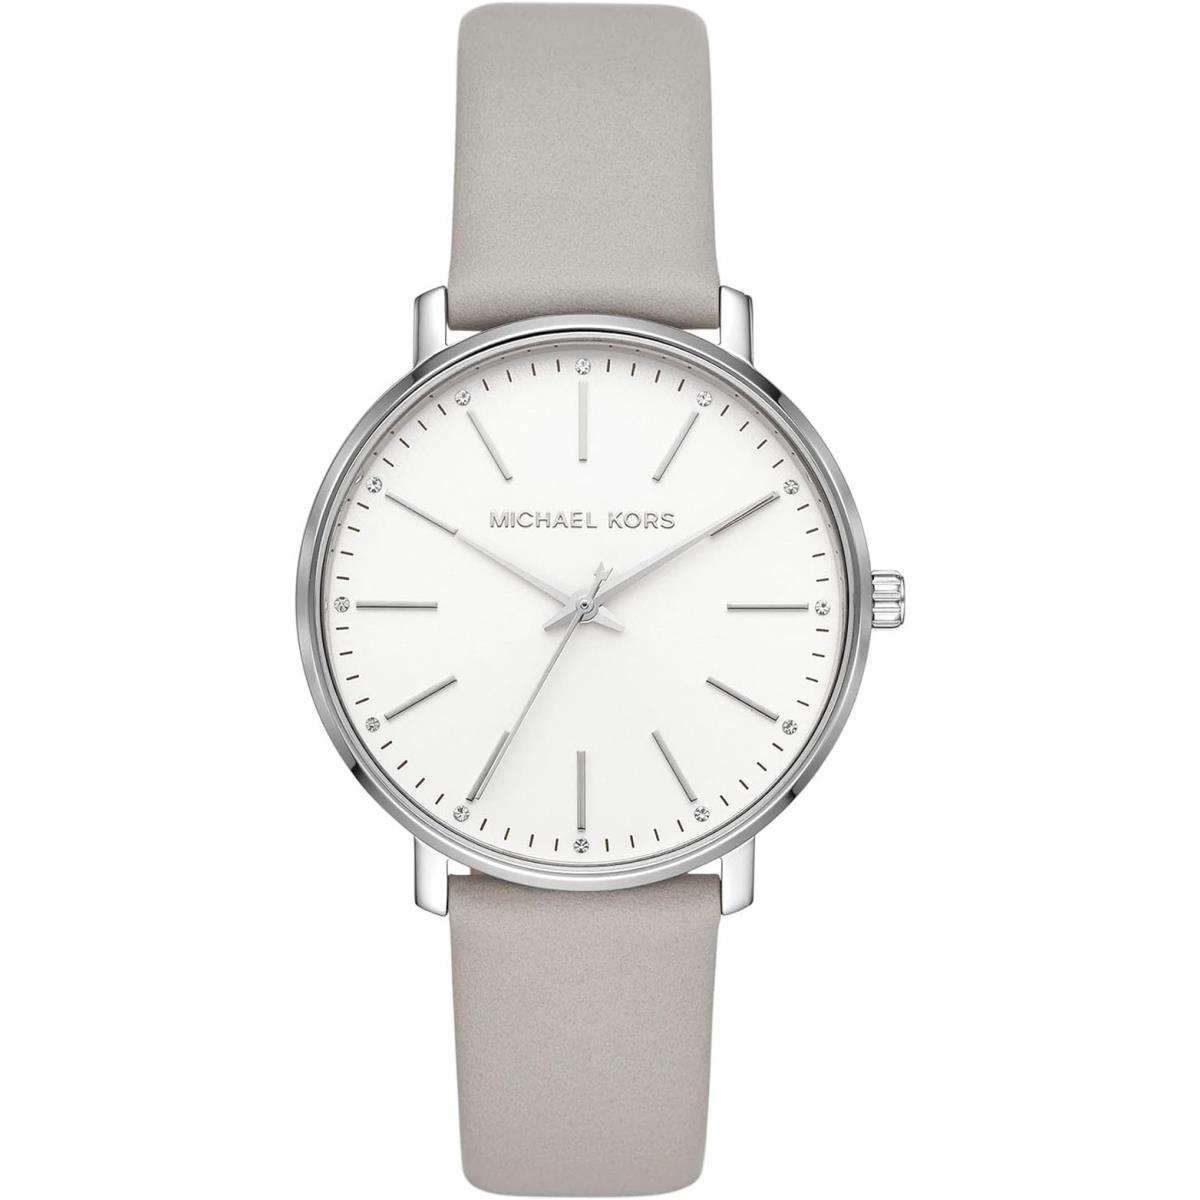 Michael Kors Pyper Stainless Steel Women`s 38mm Quartz Watch - Color Choices All Silver/Gray